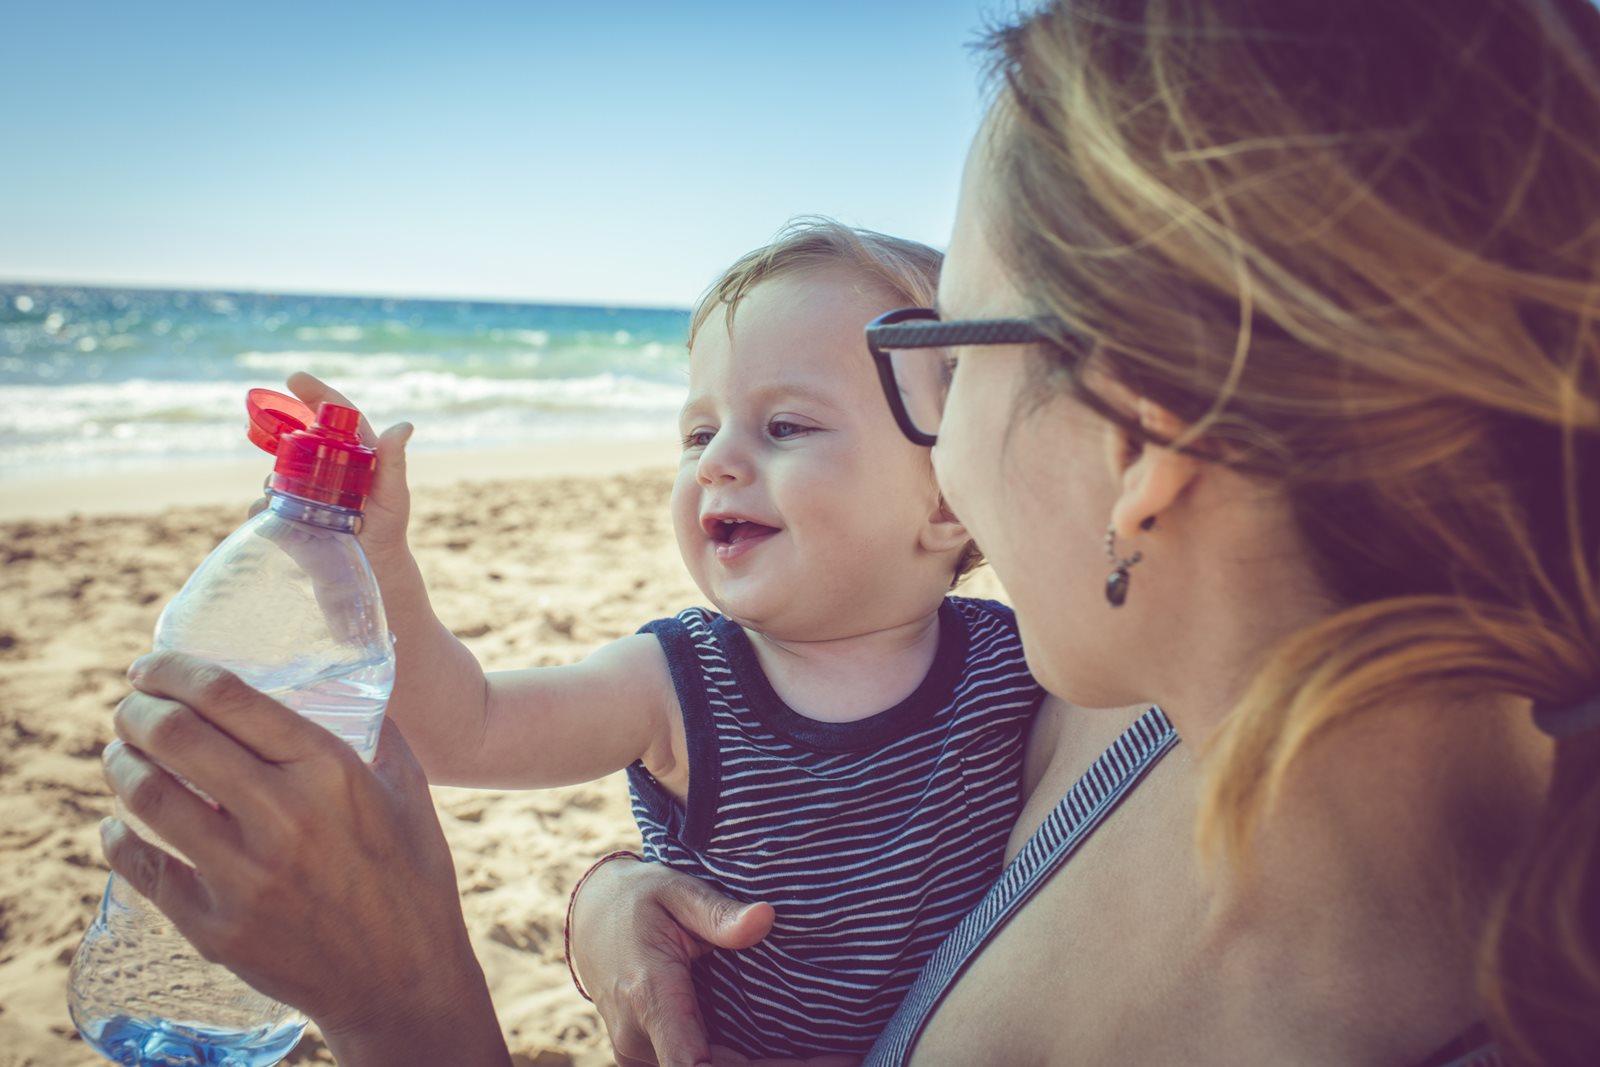 A woman cradling a baby on a beach, offering a bottle of water.